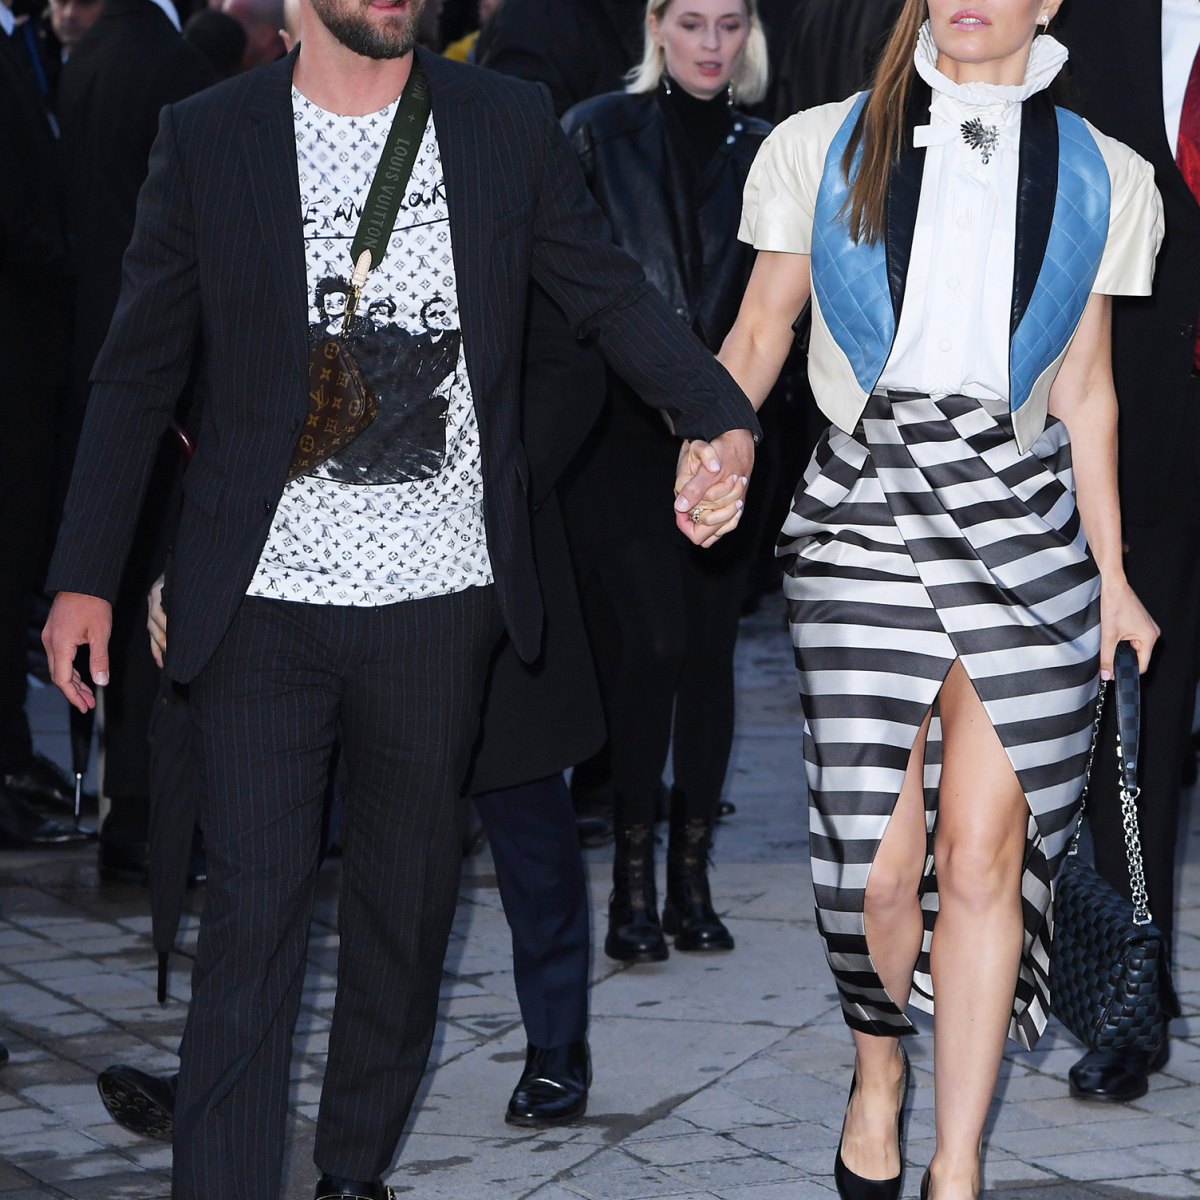 Justin Timberlake and Jessica Biel in Louis Vuitton - Louis Vuitton Show - 1